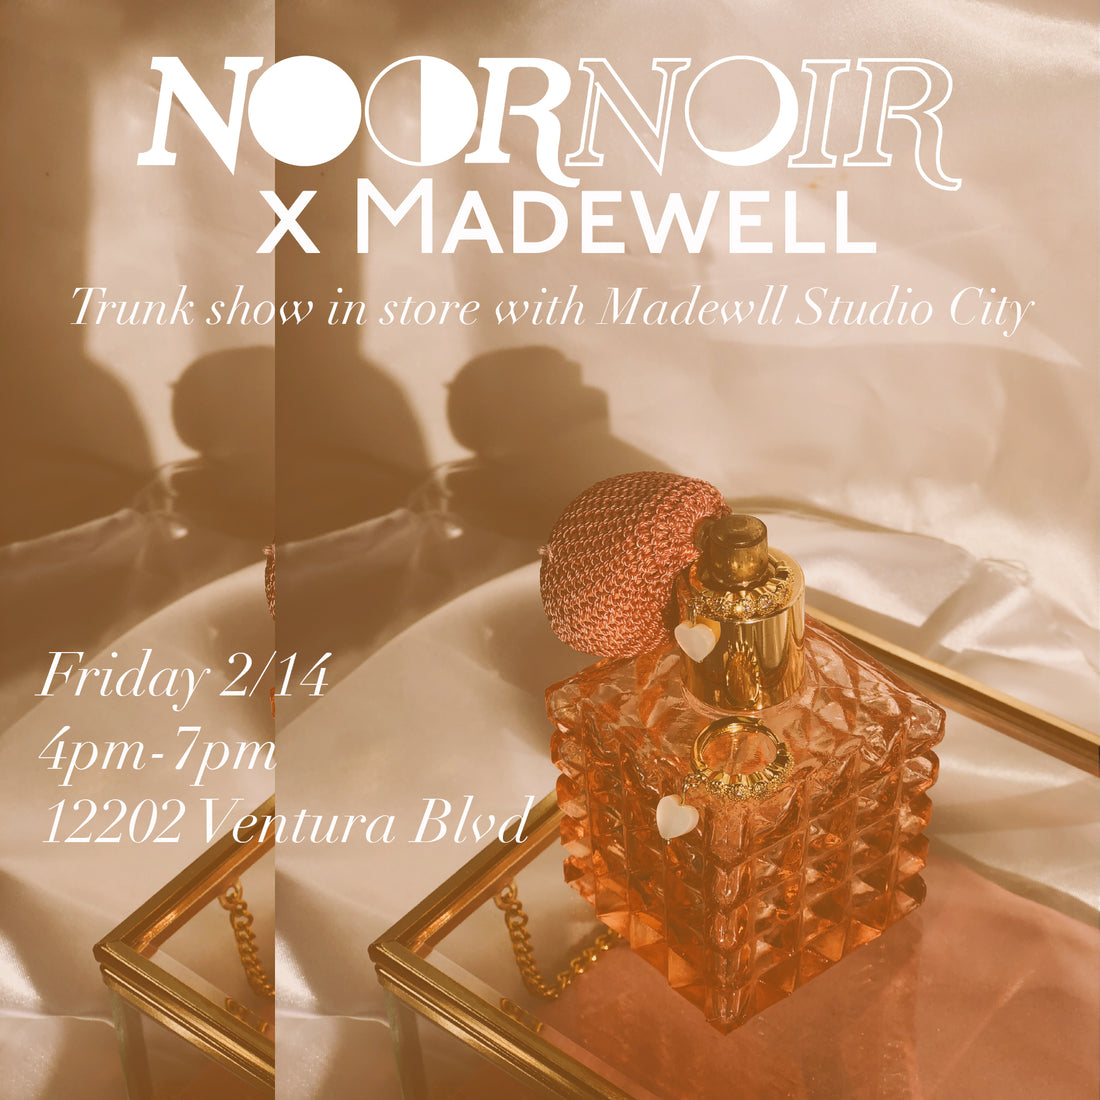 Upcoming Event: NOORNOIR x Madewell Trunk Show on 2/14/20